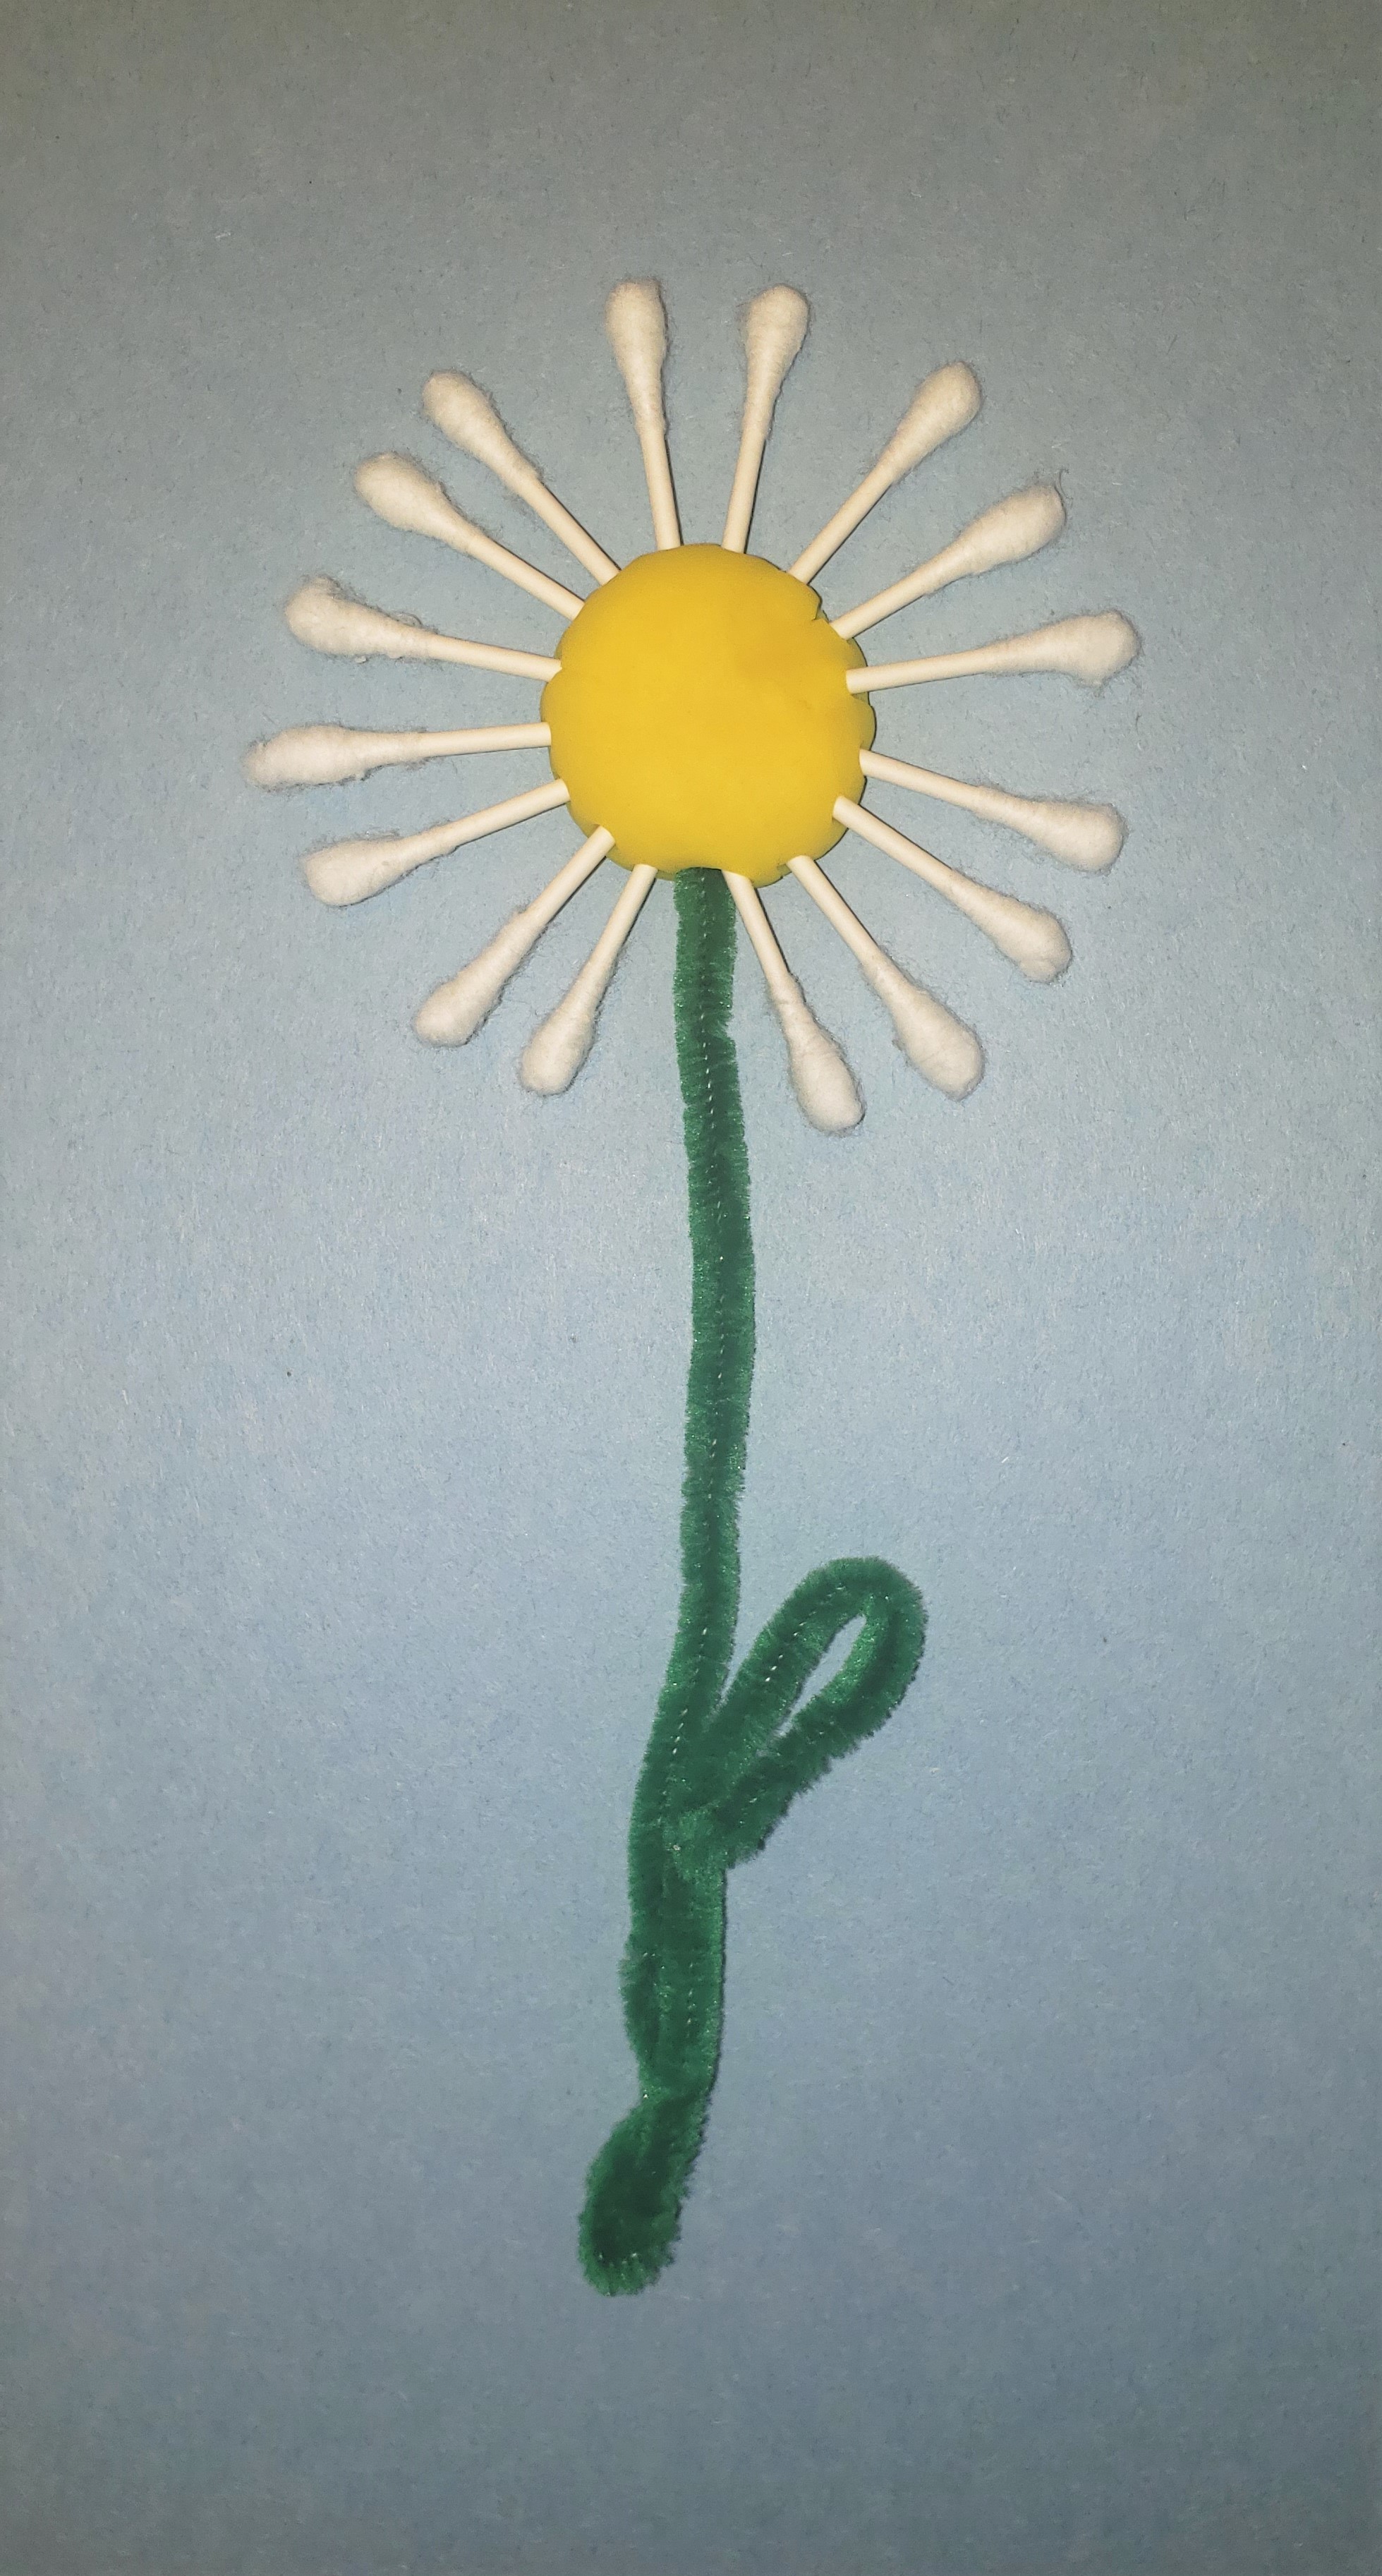 Daisy craft made from a yellow Play-doh circle surrounded by white cotton swabs, with a green pipe cleaner stem